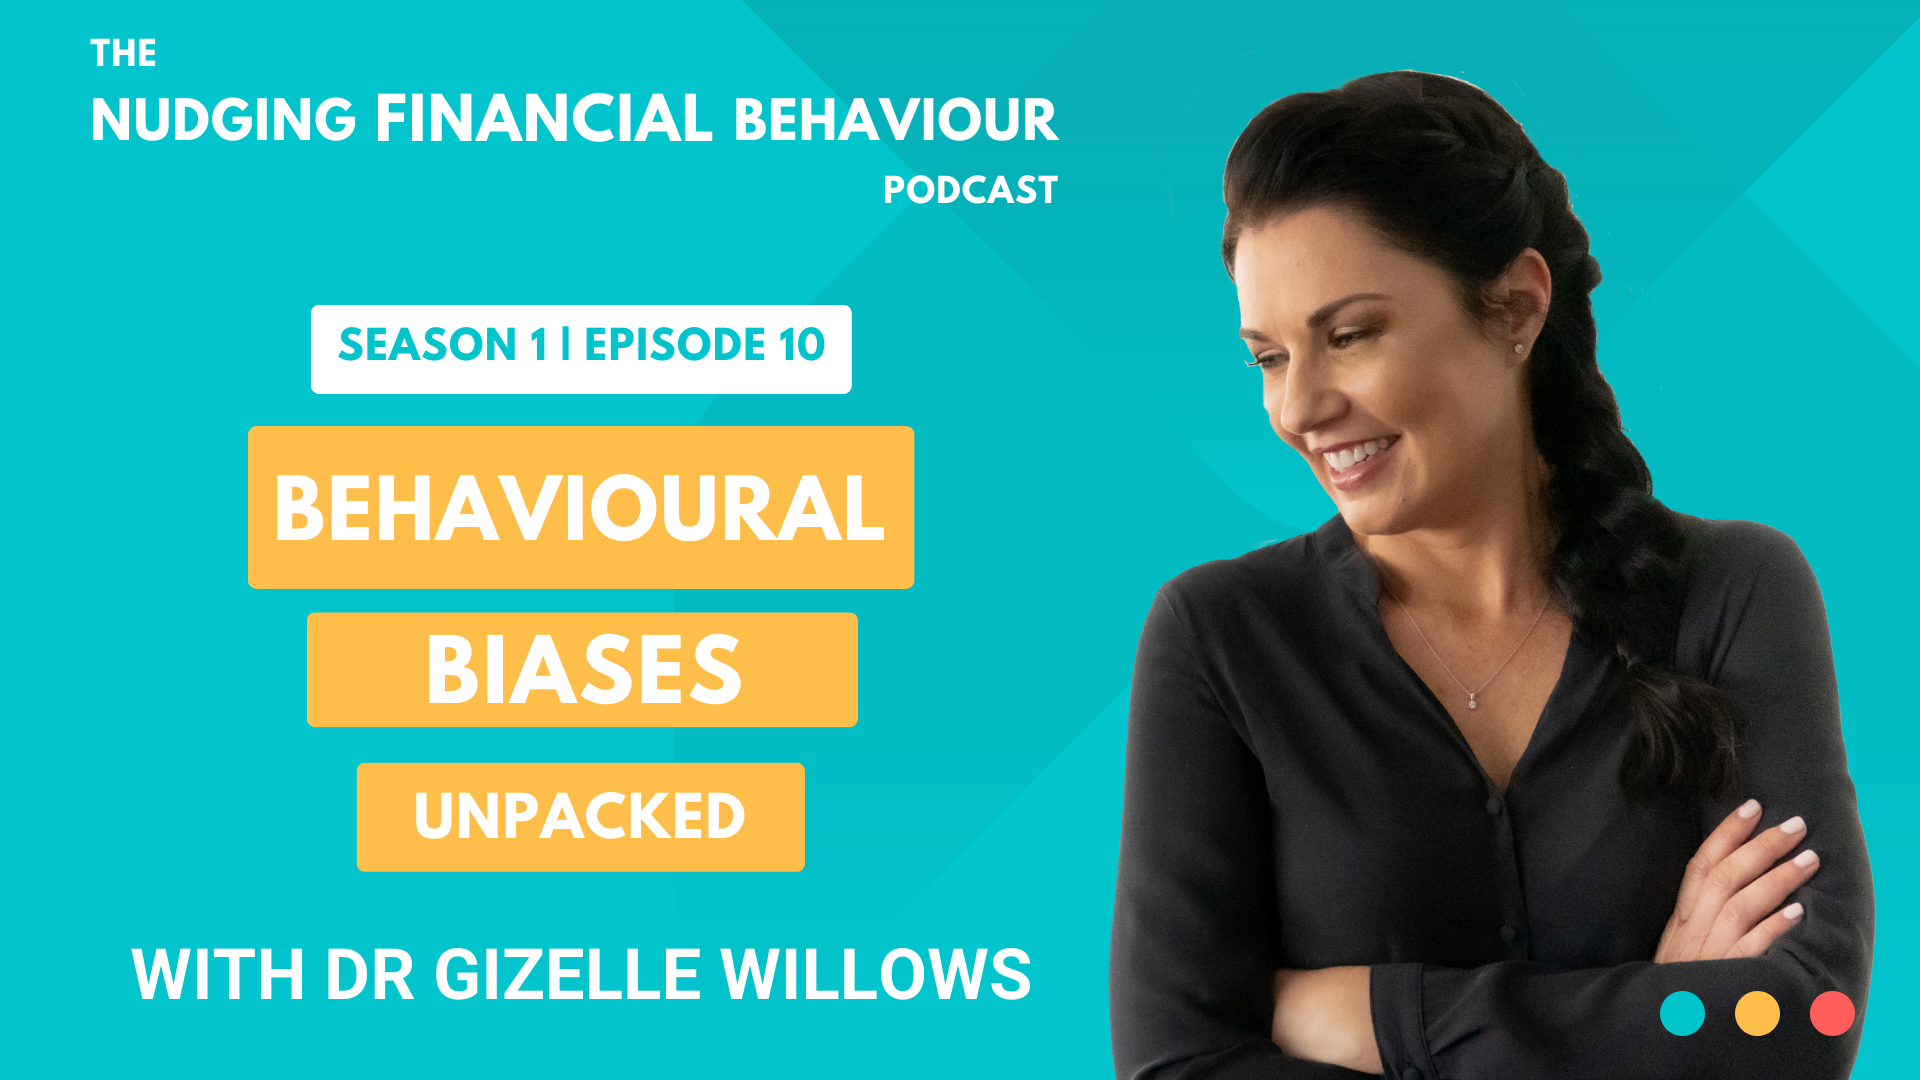 Behavioural biases unpacked on the Nudging Financial Behaviour podcast